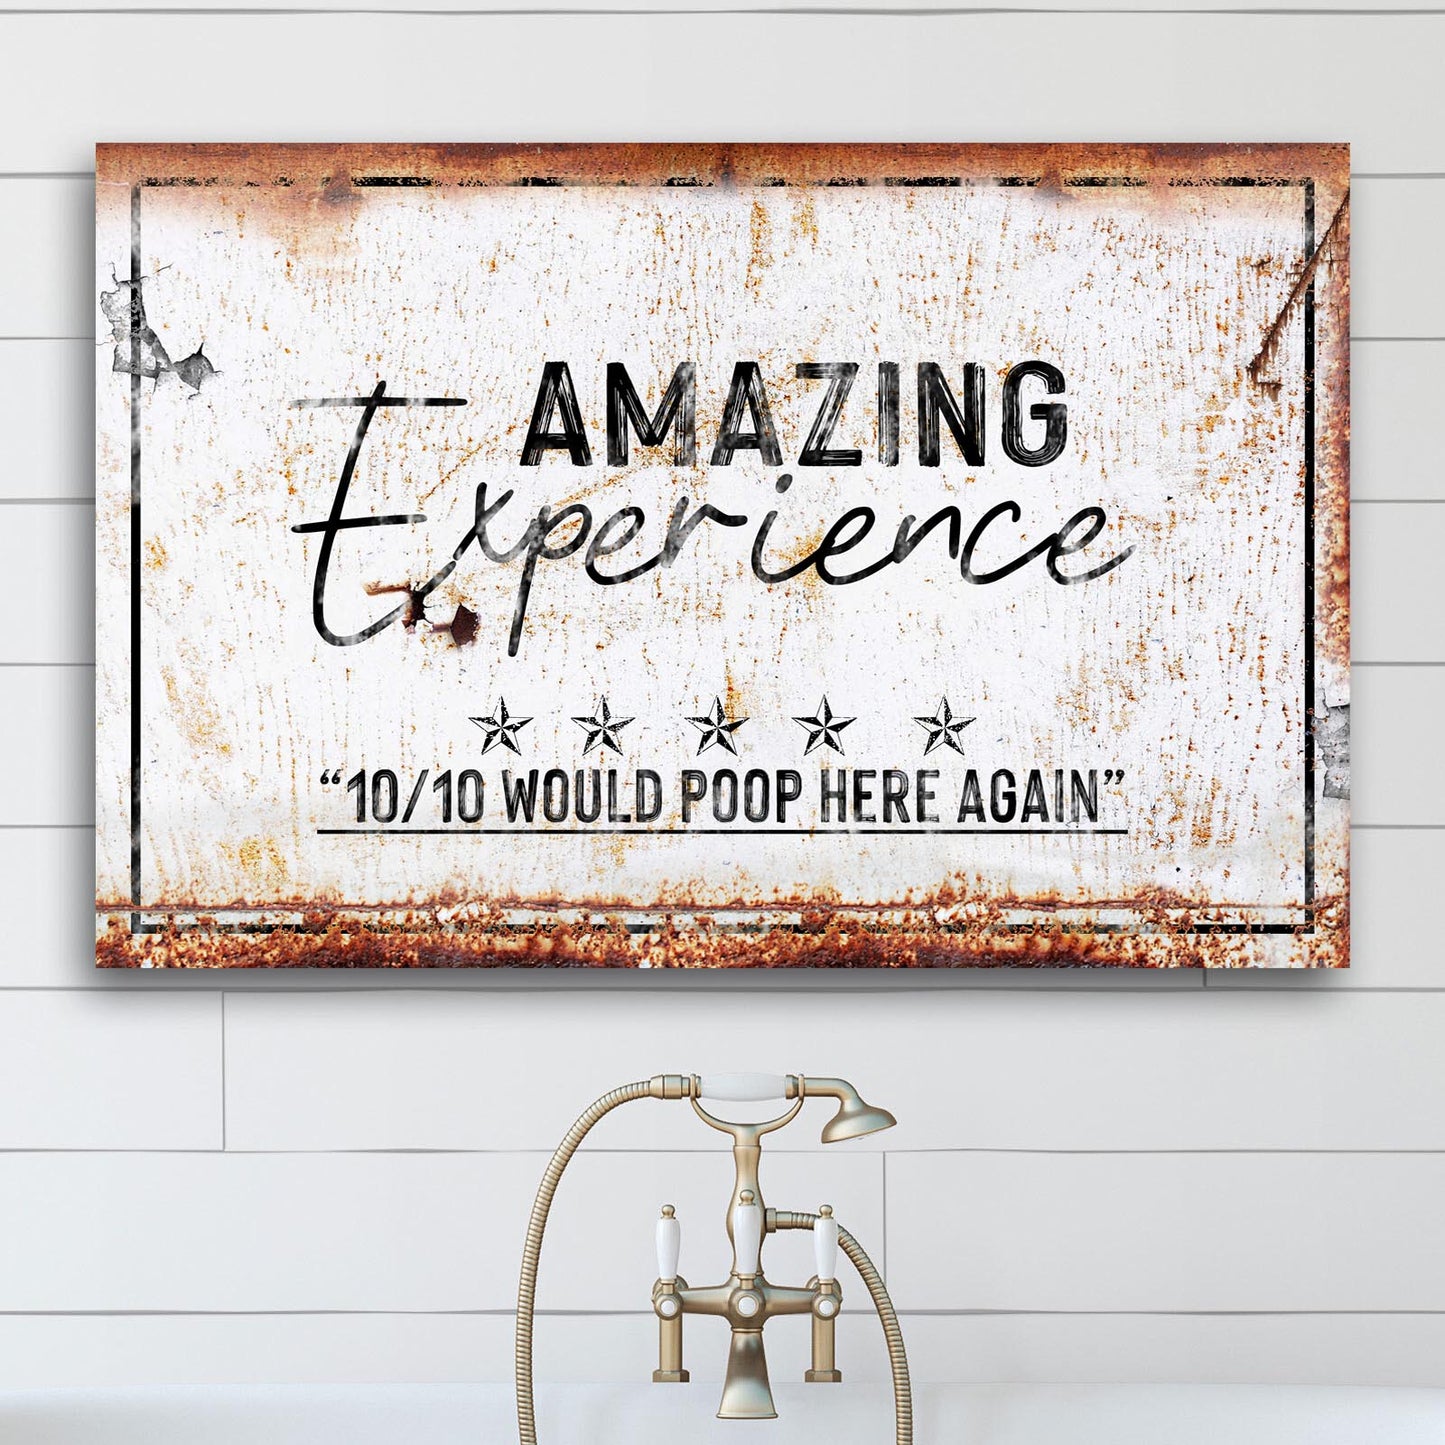 Amazing Experience Bathroom Review Sign - Image by Tailored Canvases